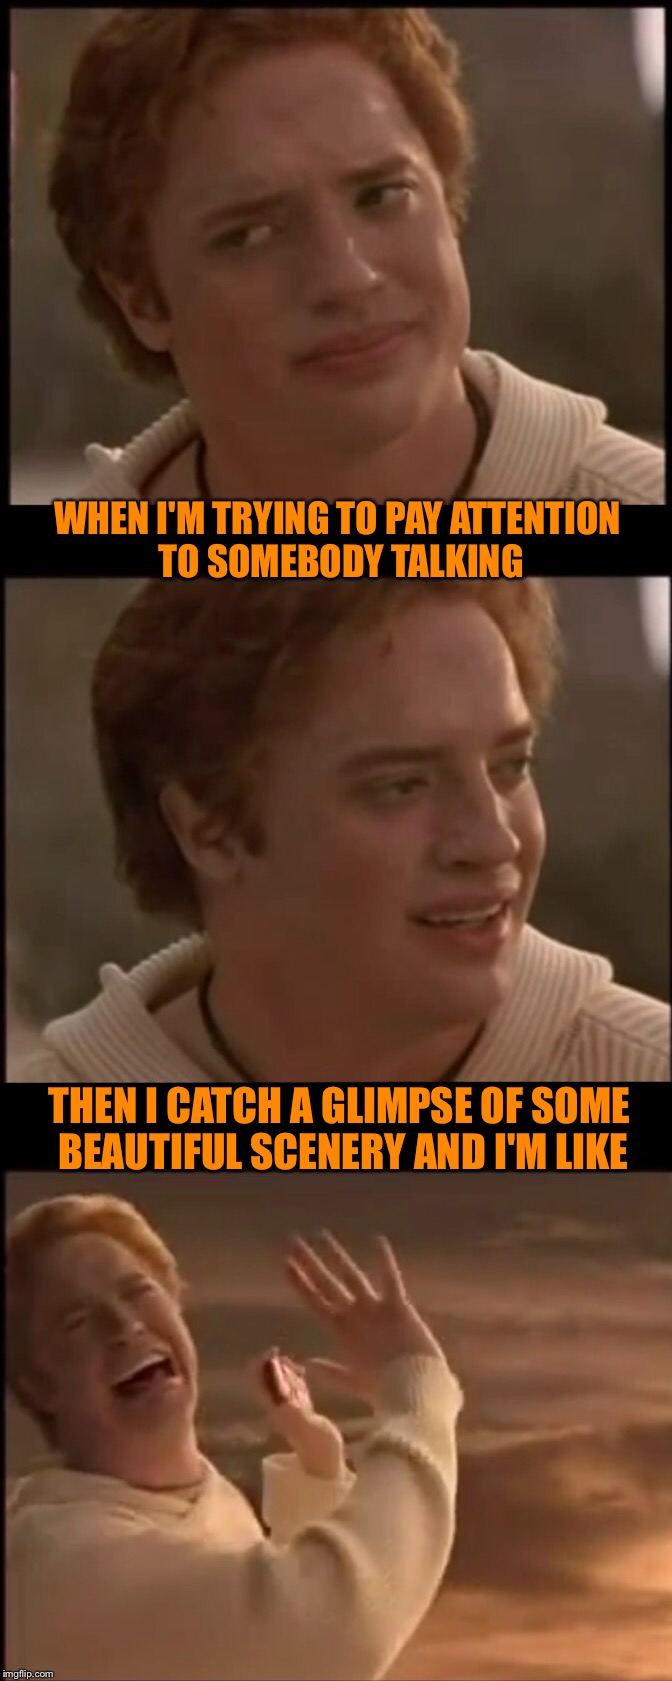 Ermahgerd it's too beautiferl | WHEN I'M TRYING TO PAY ATTENTION TO SOMEBODY TALKING; THEN I CATCH A GLIMPSE OF SOME BEAUTIFUL SCENERY AND I'M LIKE | image tagged in memes,beautiful,sunset,pay,scenery,attention | made w/ Imgflip meme maker